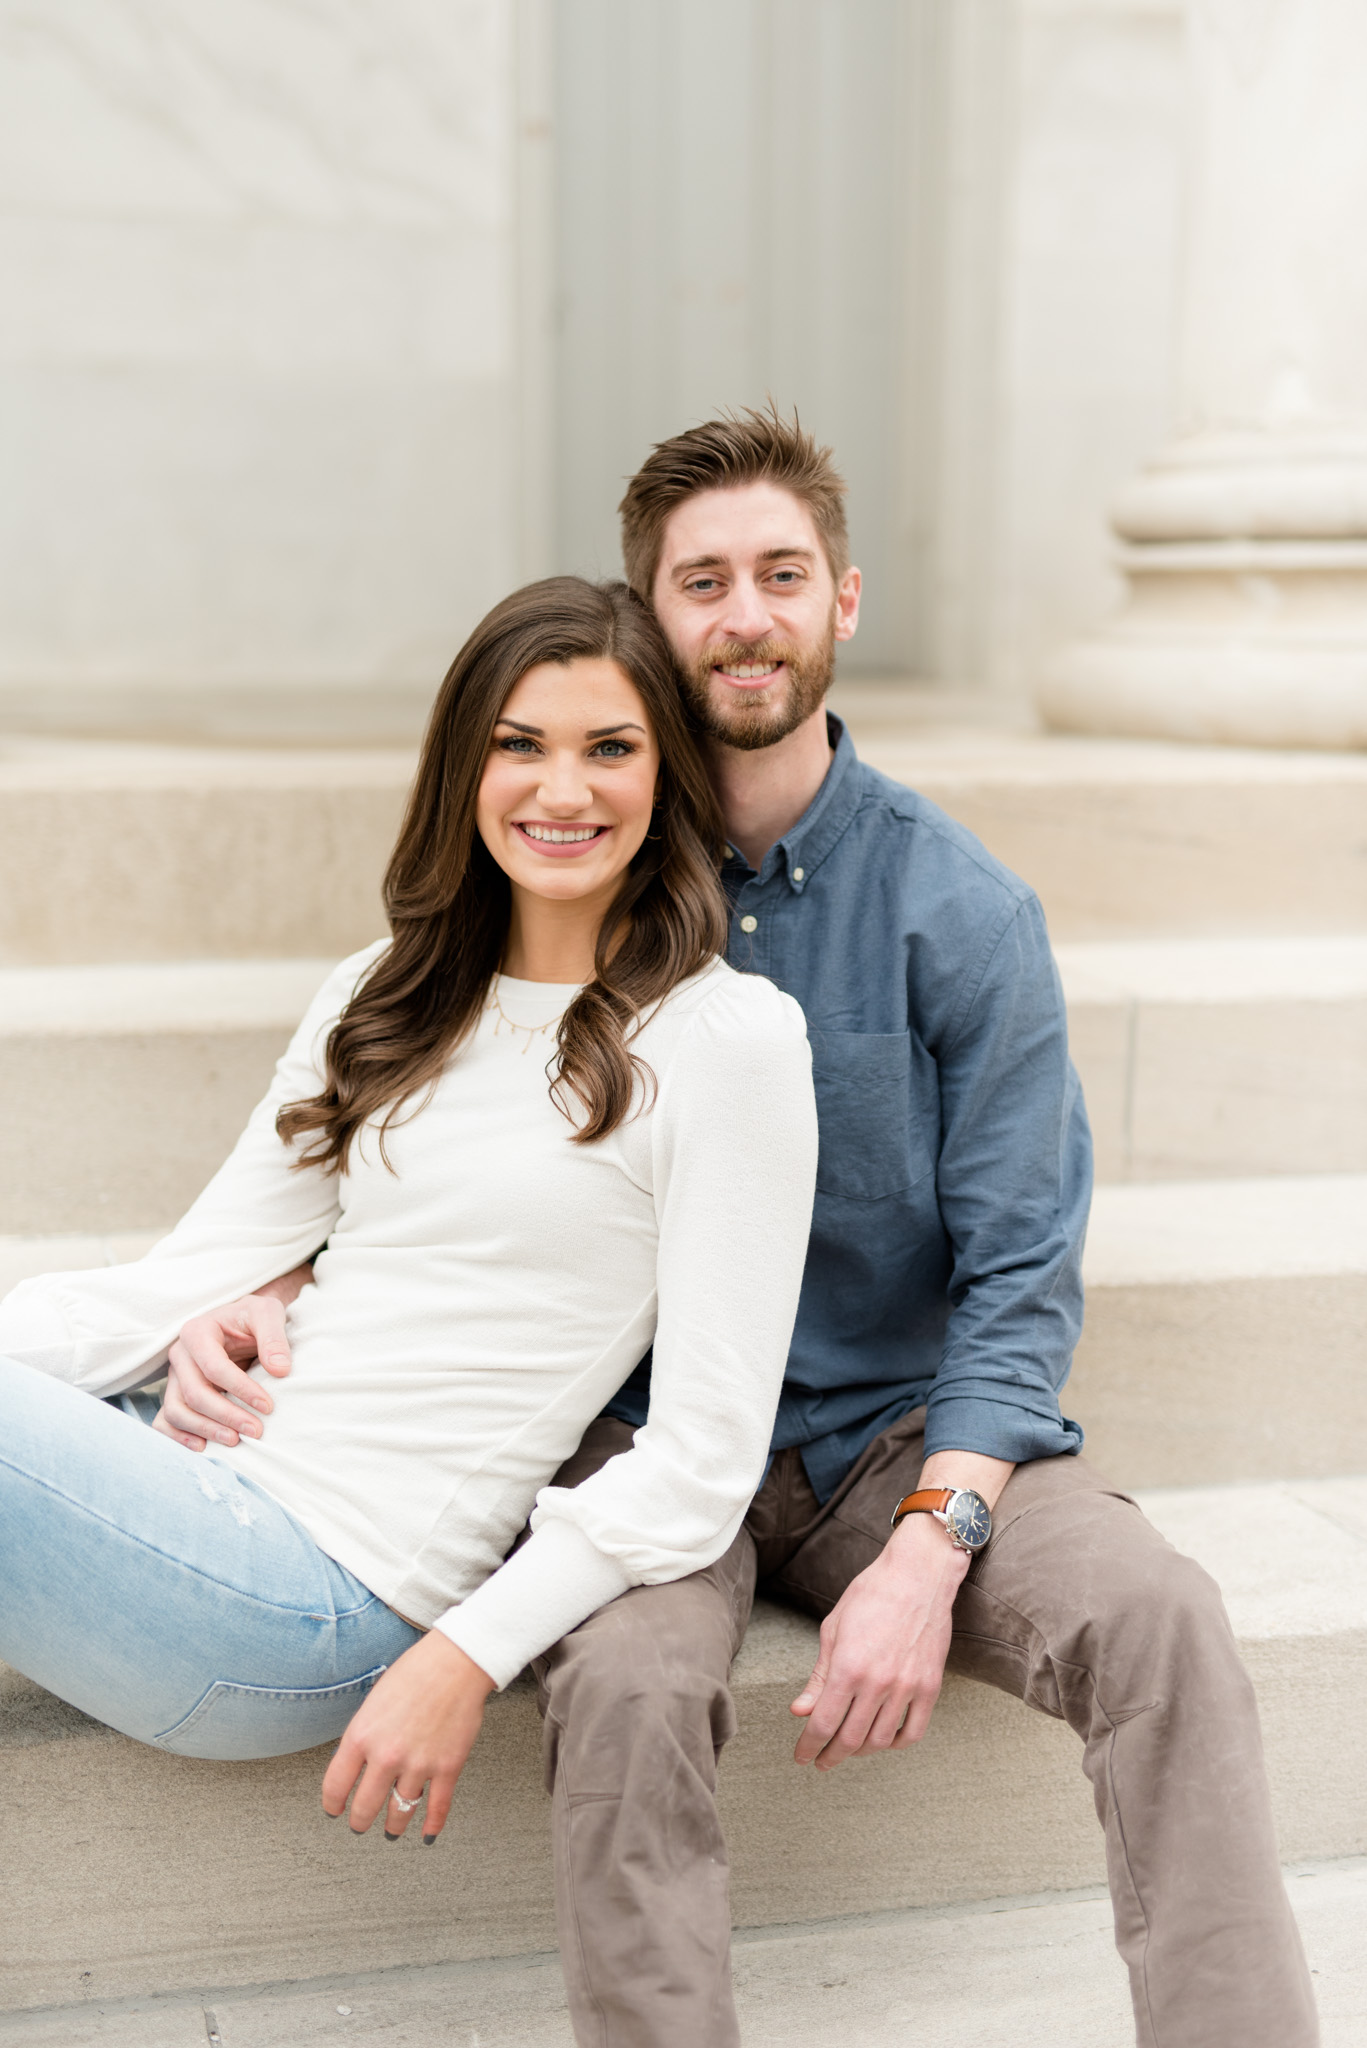 Couple sit on stairs and smile at camera.